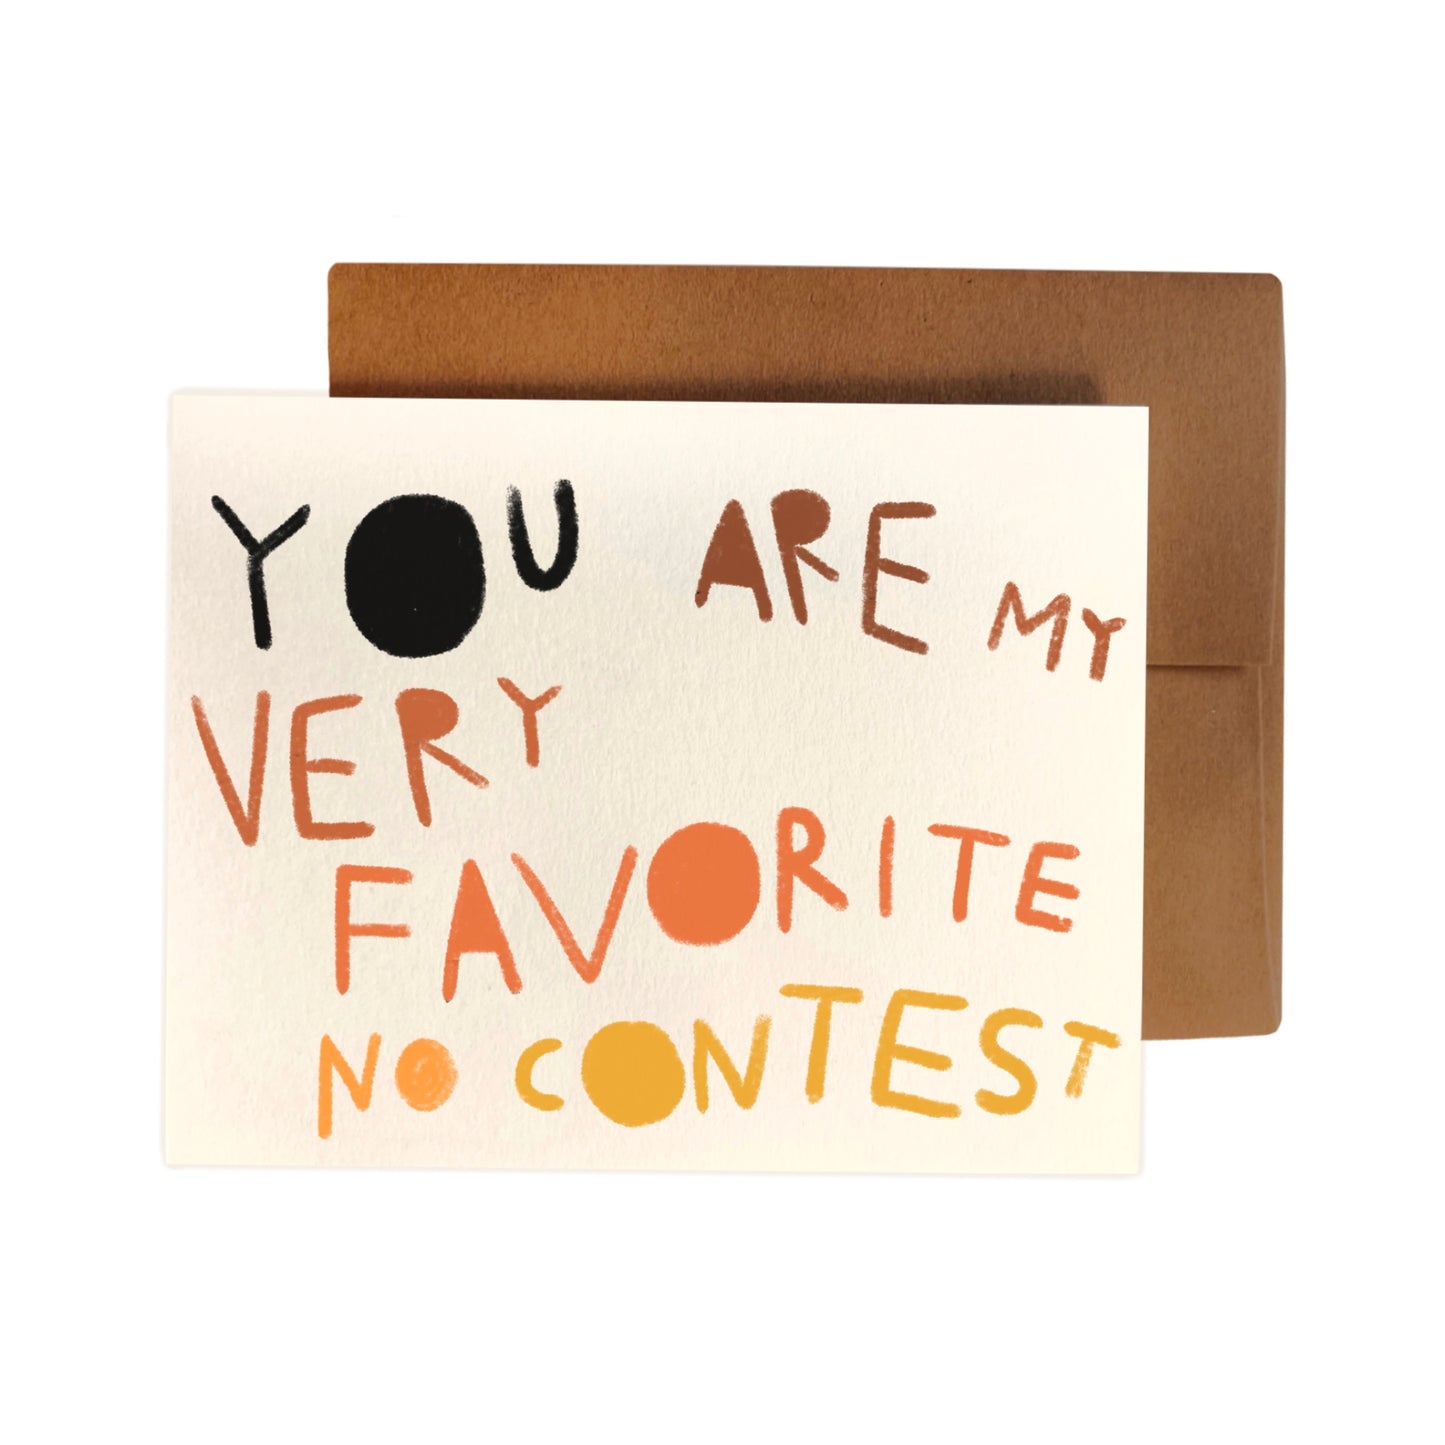 YOU ARE MY VERY FAVORITE NO CONTEST Card